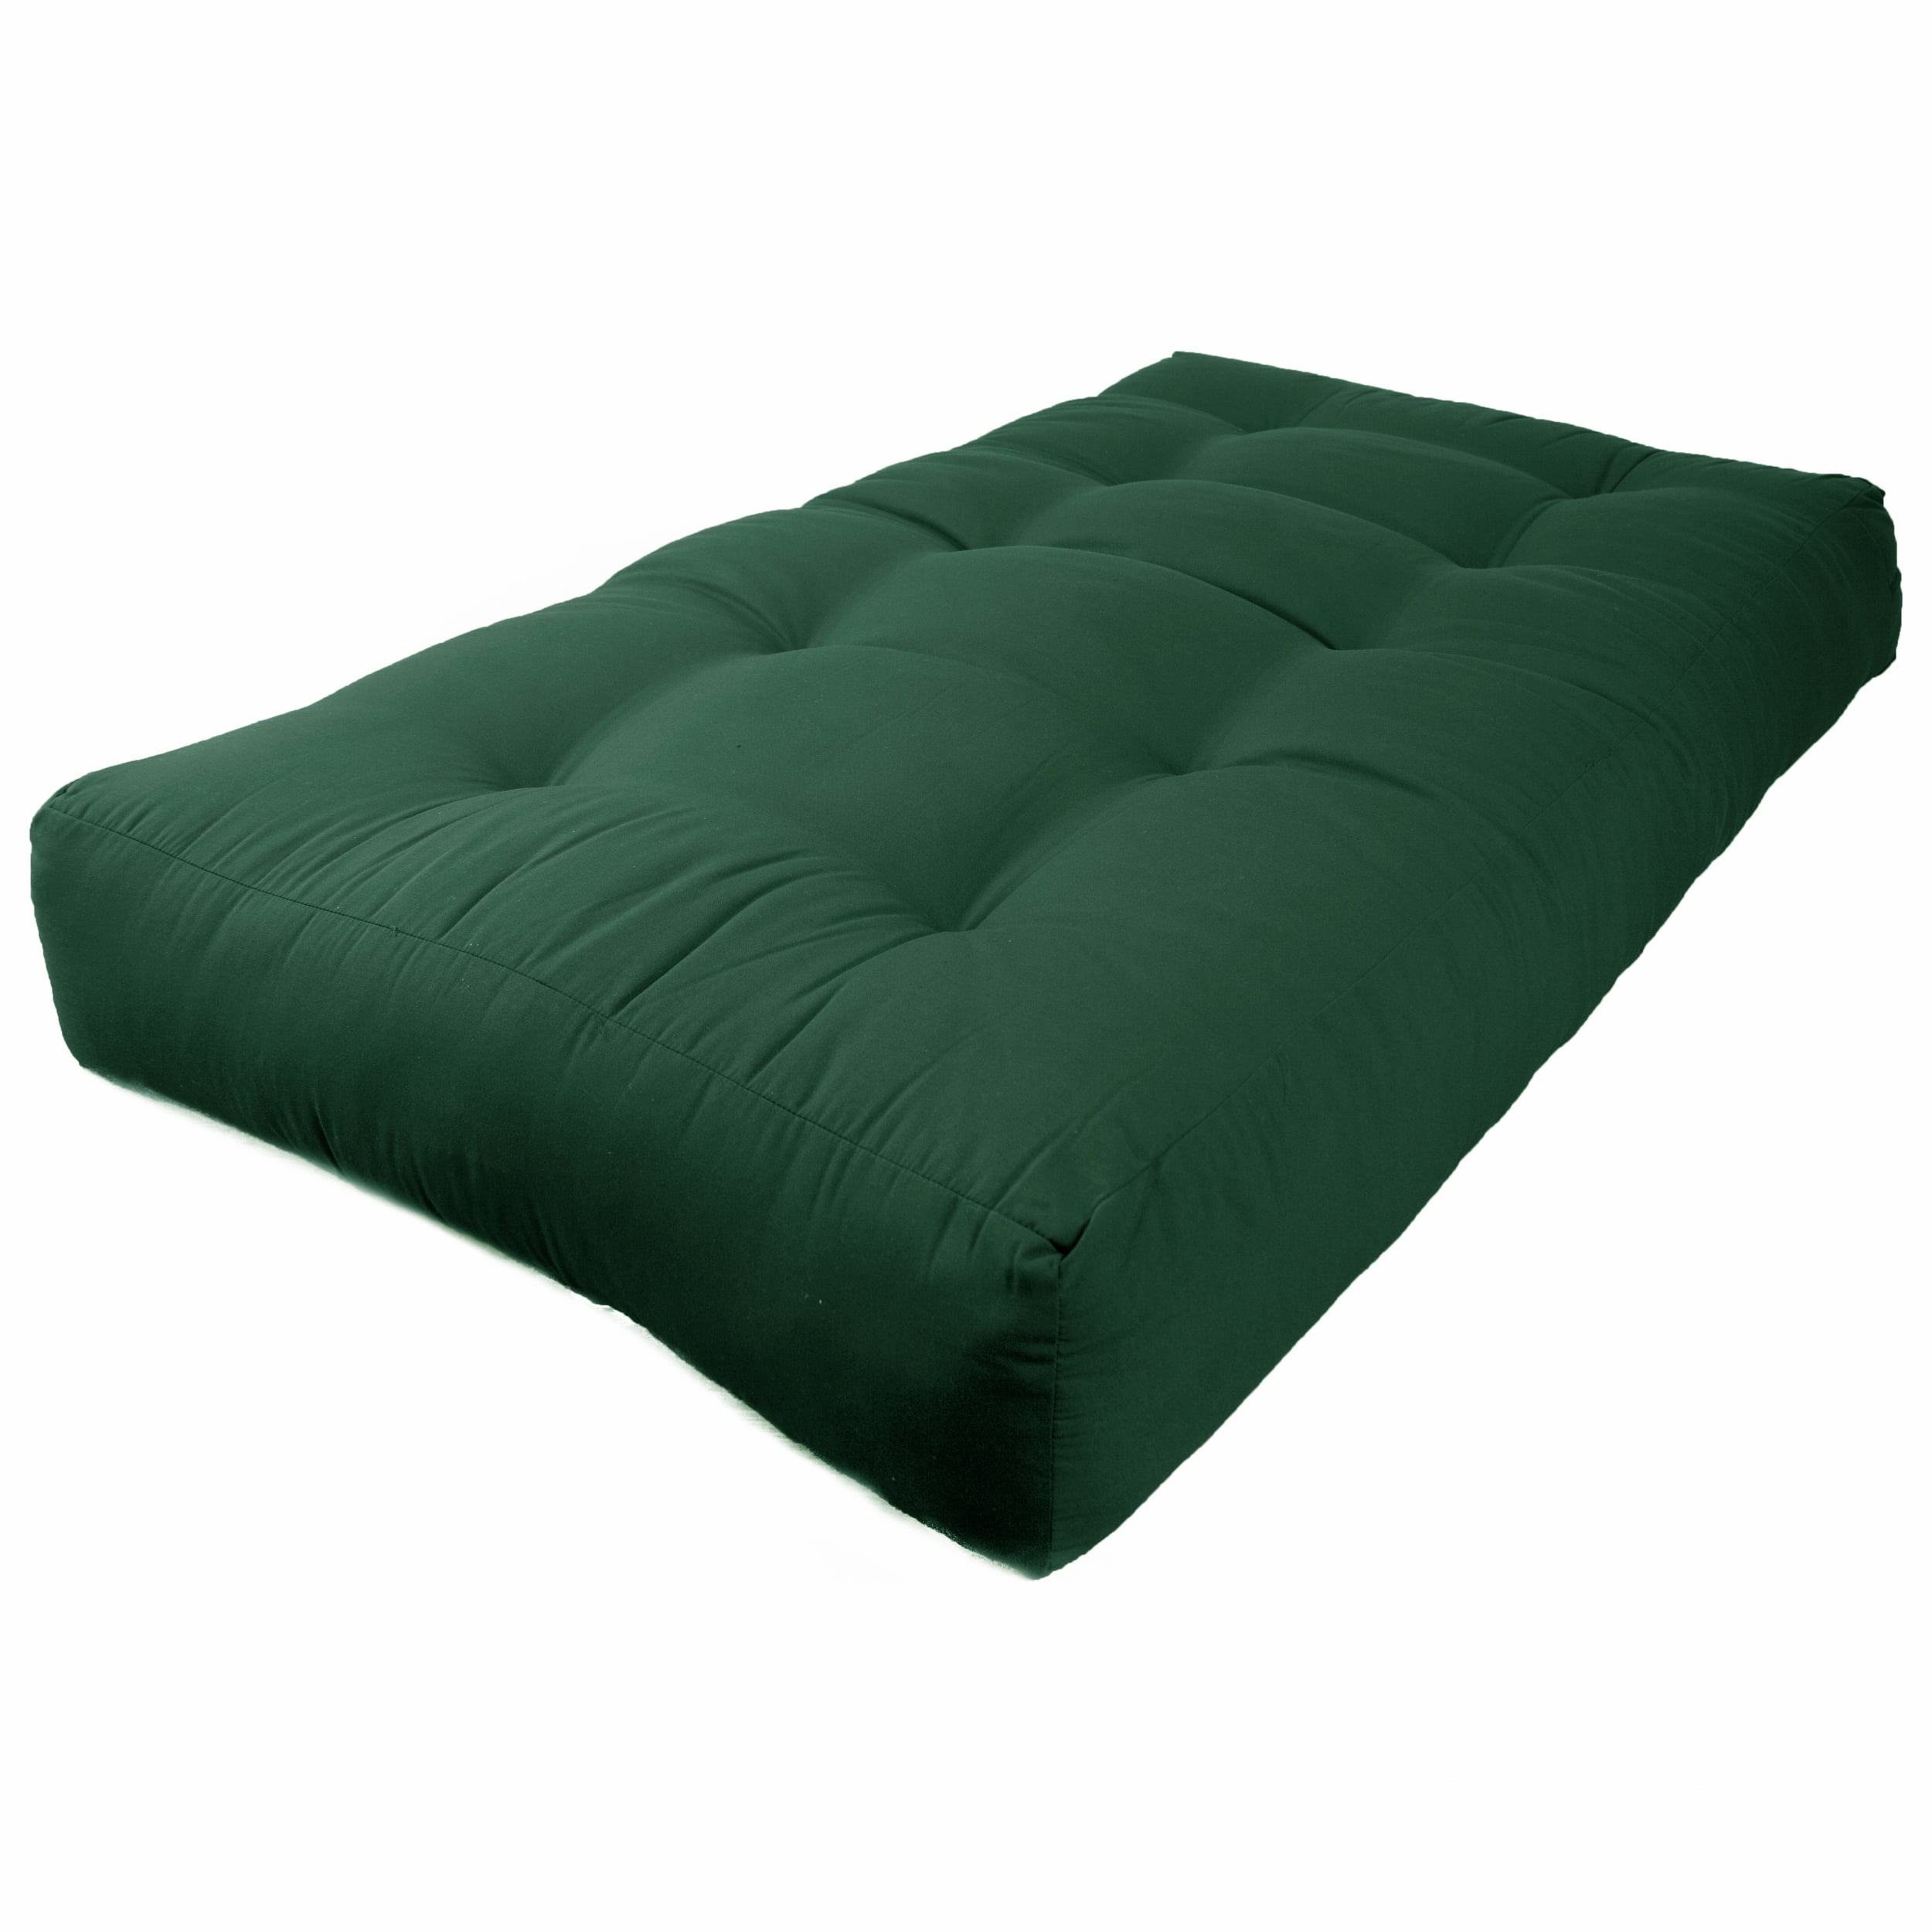 Picture of Blazing Needles 9602-B-TW-FG 9 in. Renewal Twill Twin Size Futon Mattress, Forest Green